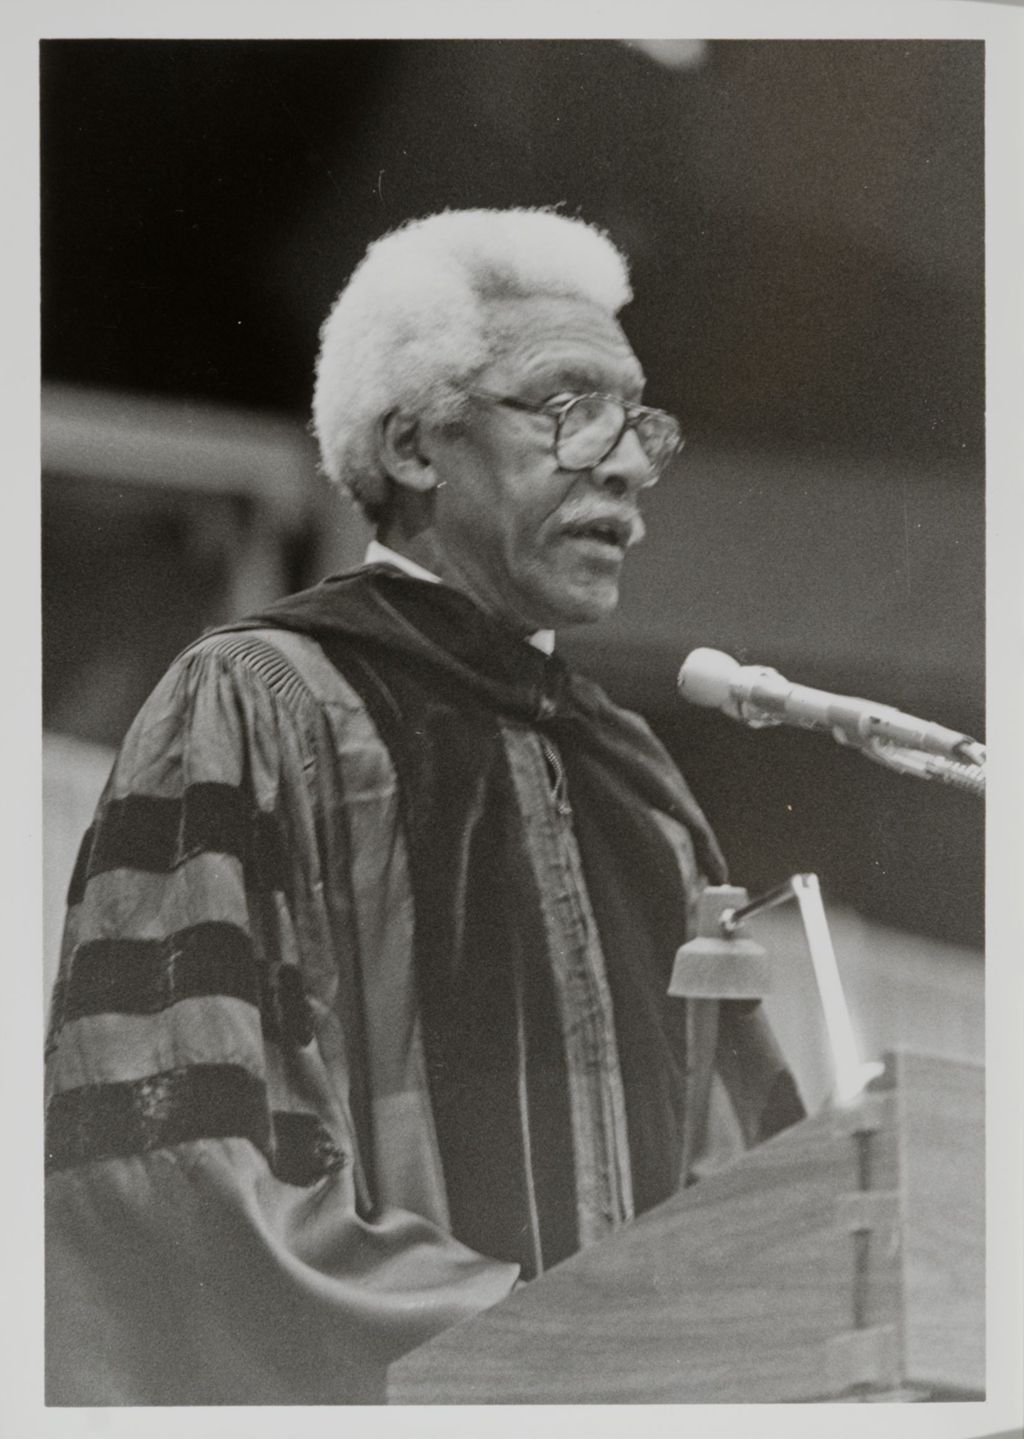 Bayard Rustin addressing the audience at the graduation ceremony